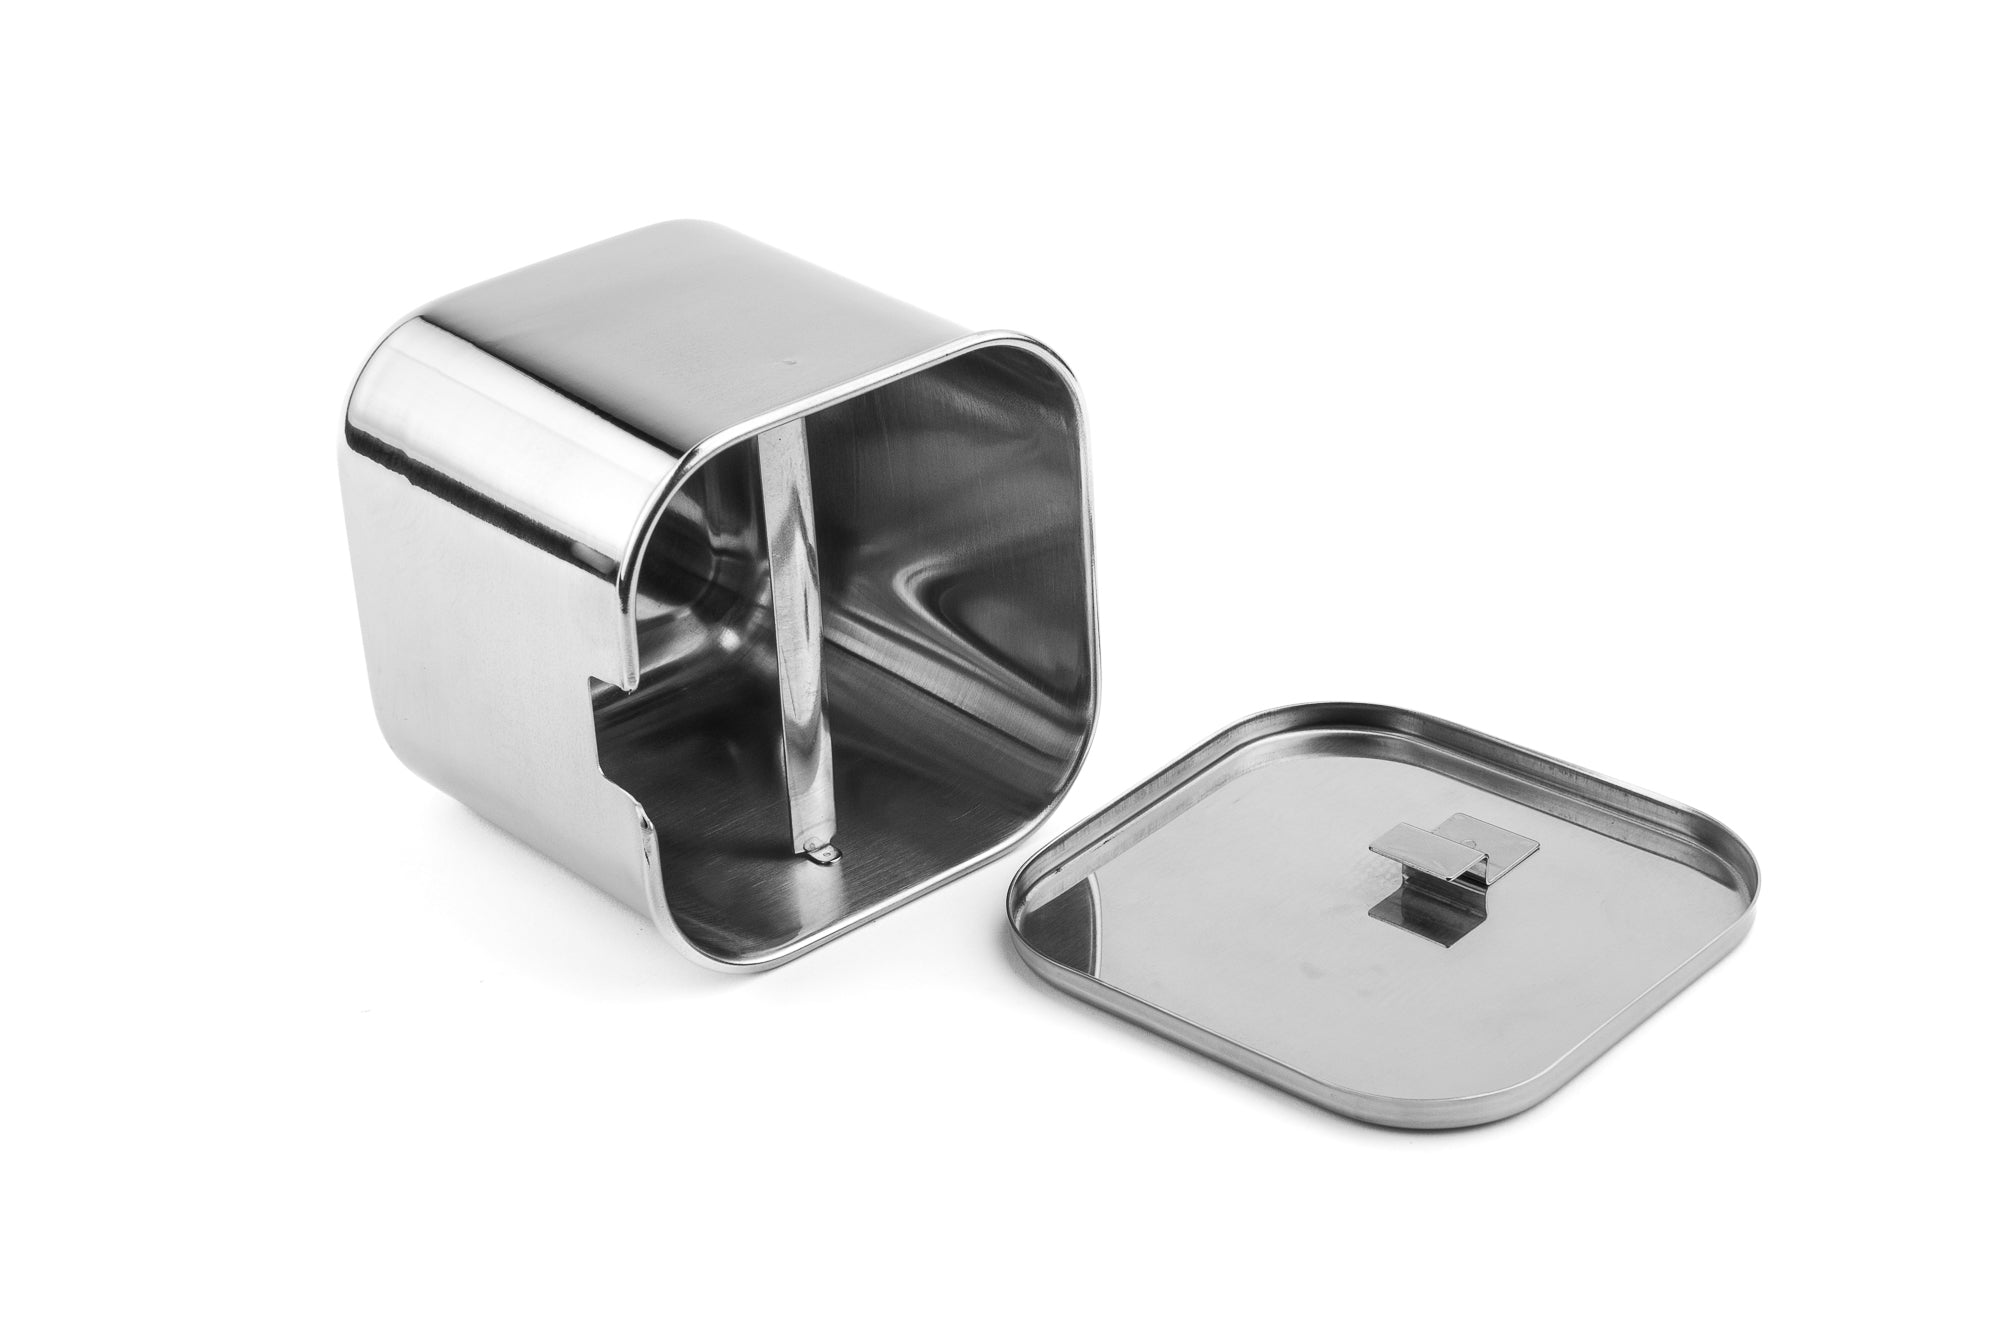 Stainless Steel Sauce Tare Container